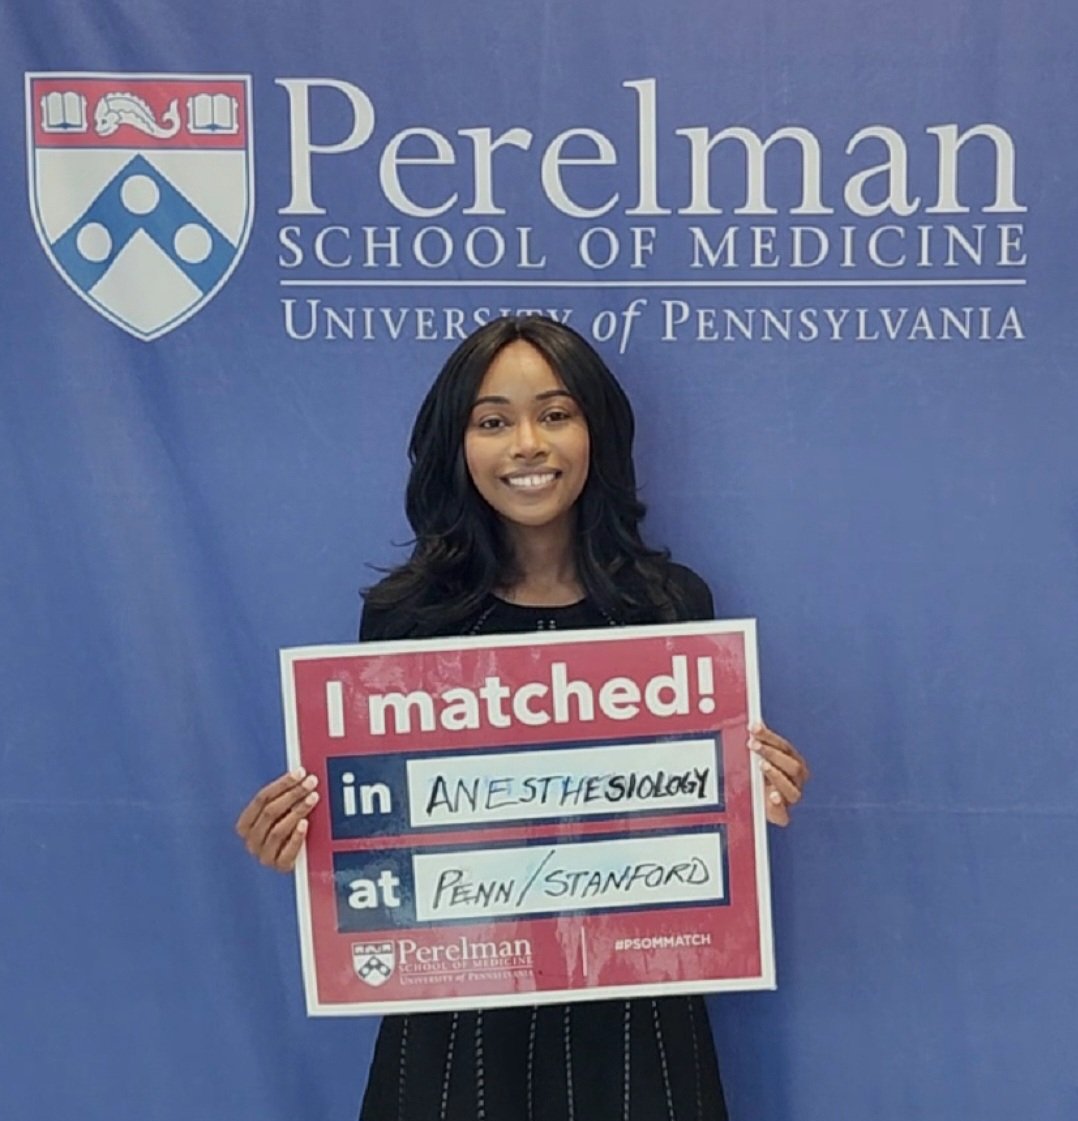 Ecstatic, humbled, and eternally grateful to have matched at @ImPennsy and @stanfordanes for residency! I couldn't have asked for a sweeter end to this chapter of my med school journey. Looking forward to meeting all of my future faculty and co-residents! #MatchDay2024